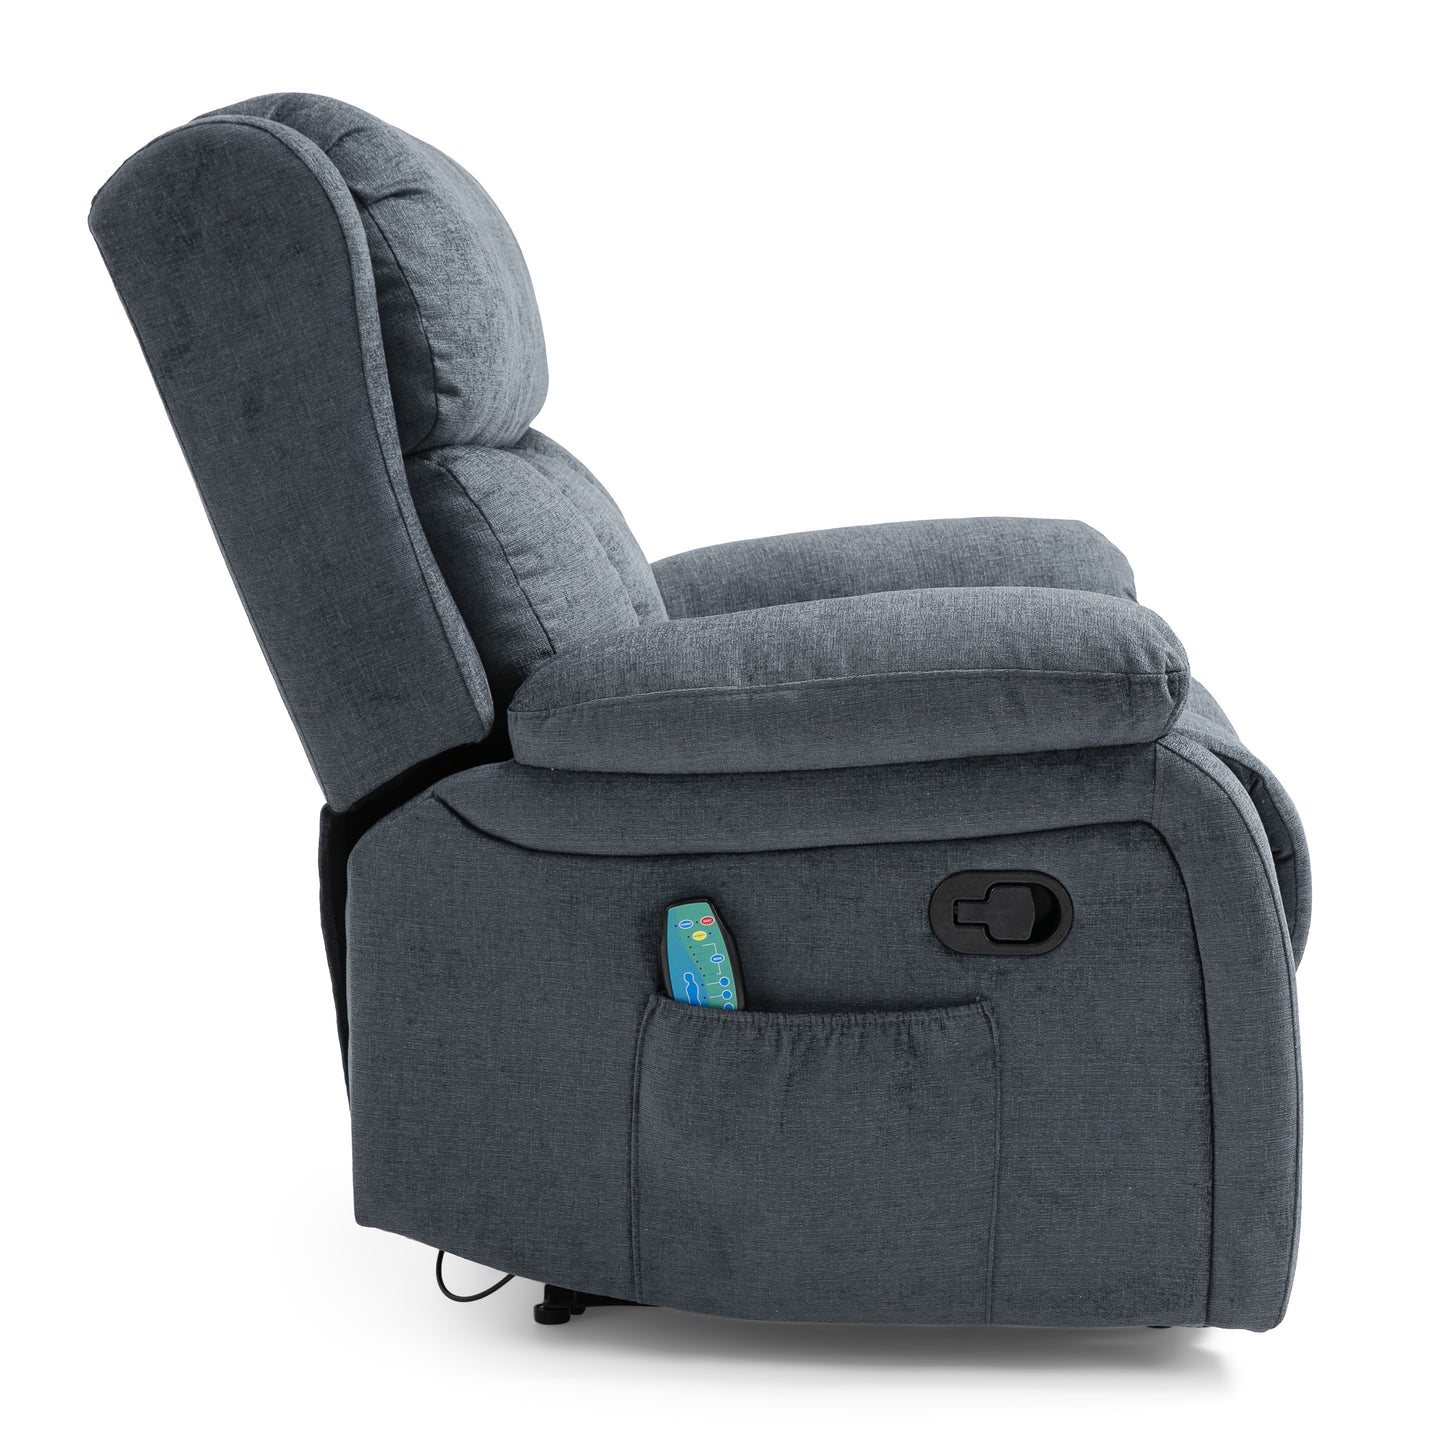 Lexie Contemporary Pillow Tufted Massage Recliner